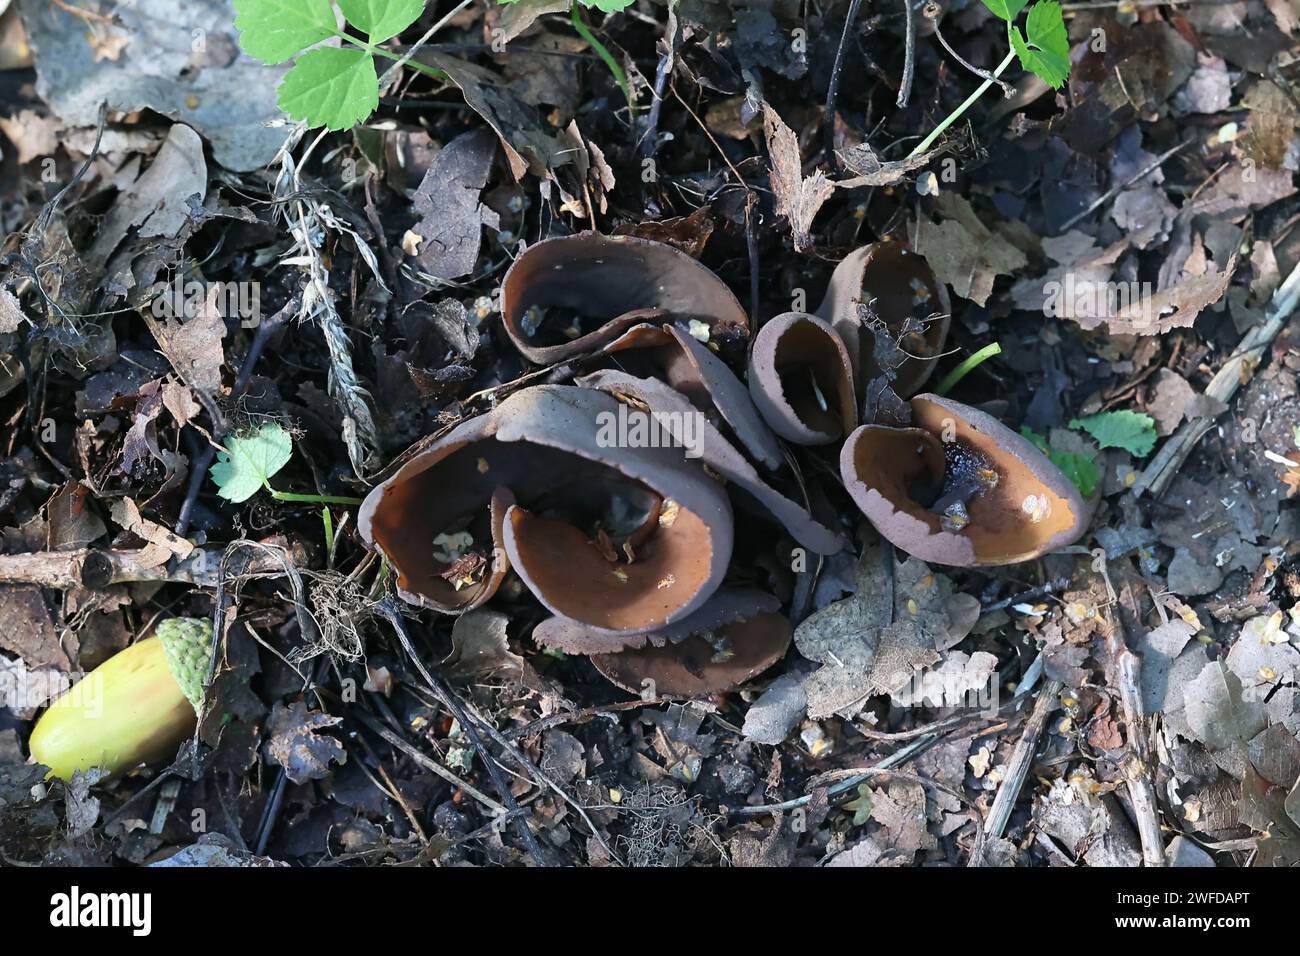 Otidea bufonia, known as split goblet or rabbit-ear cup fungus, wild mushroom from Finland Stock Photo